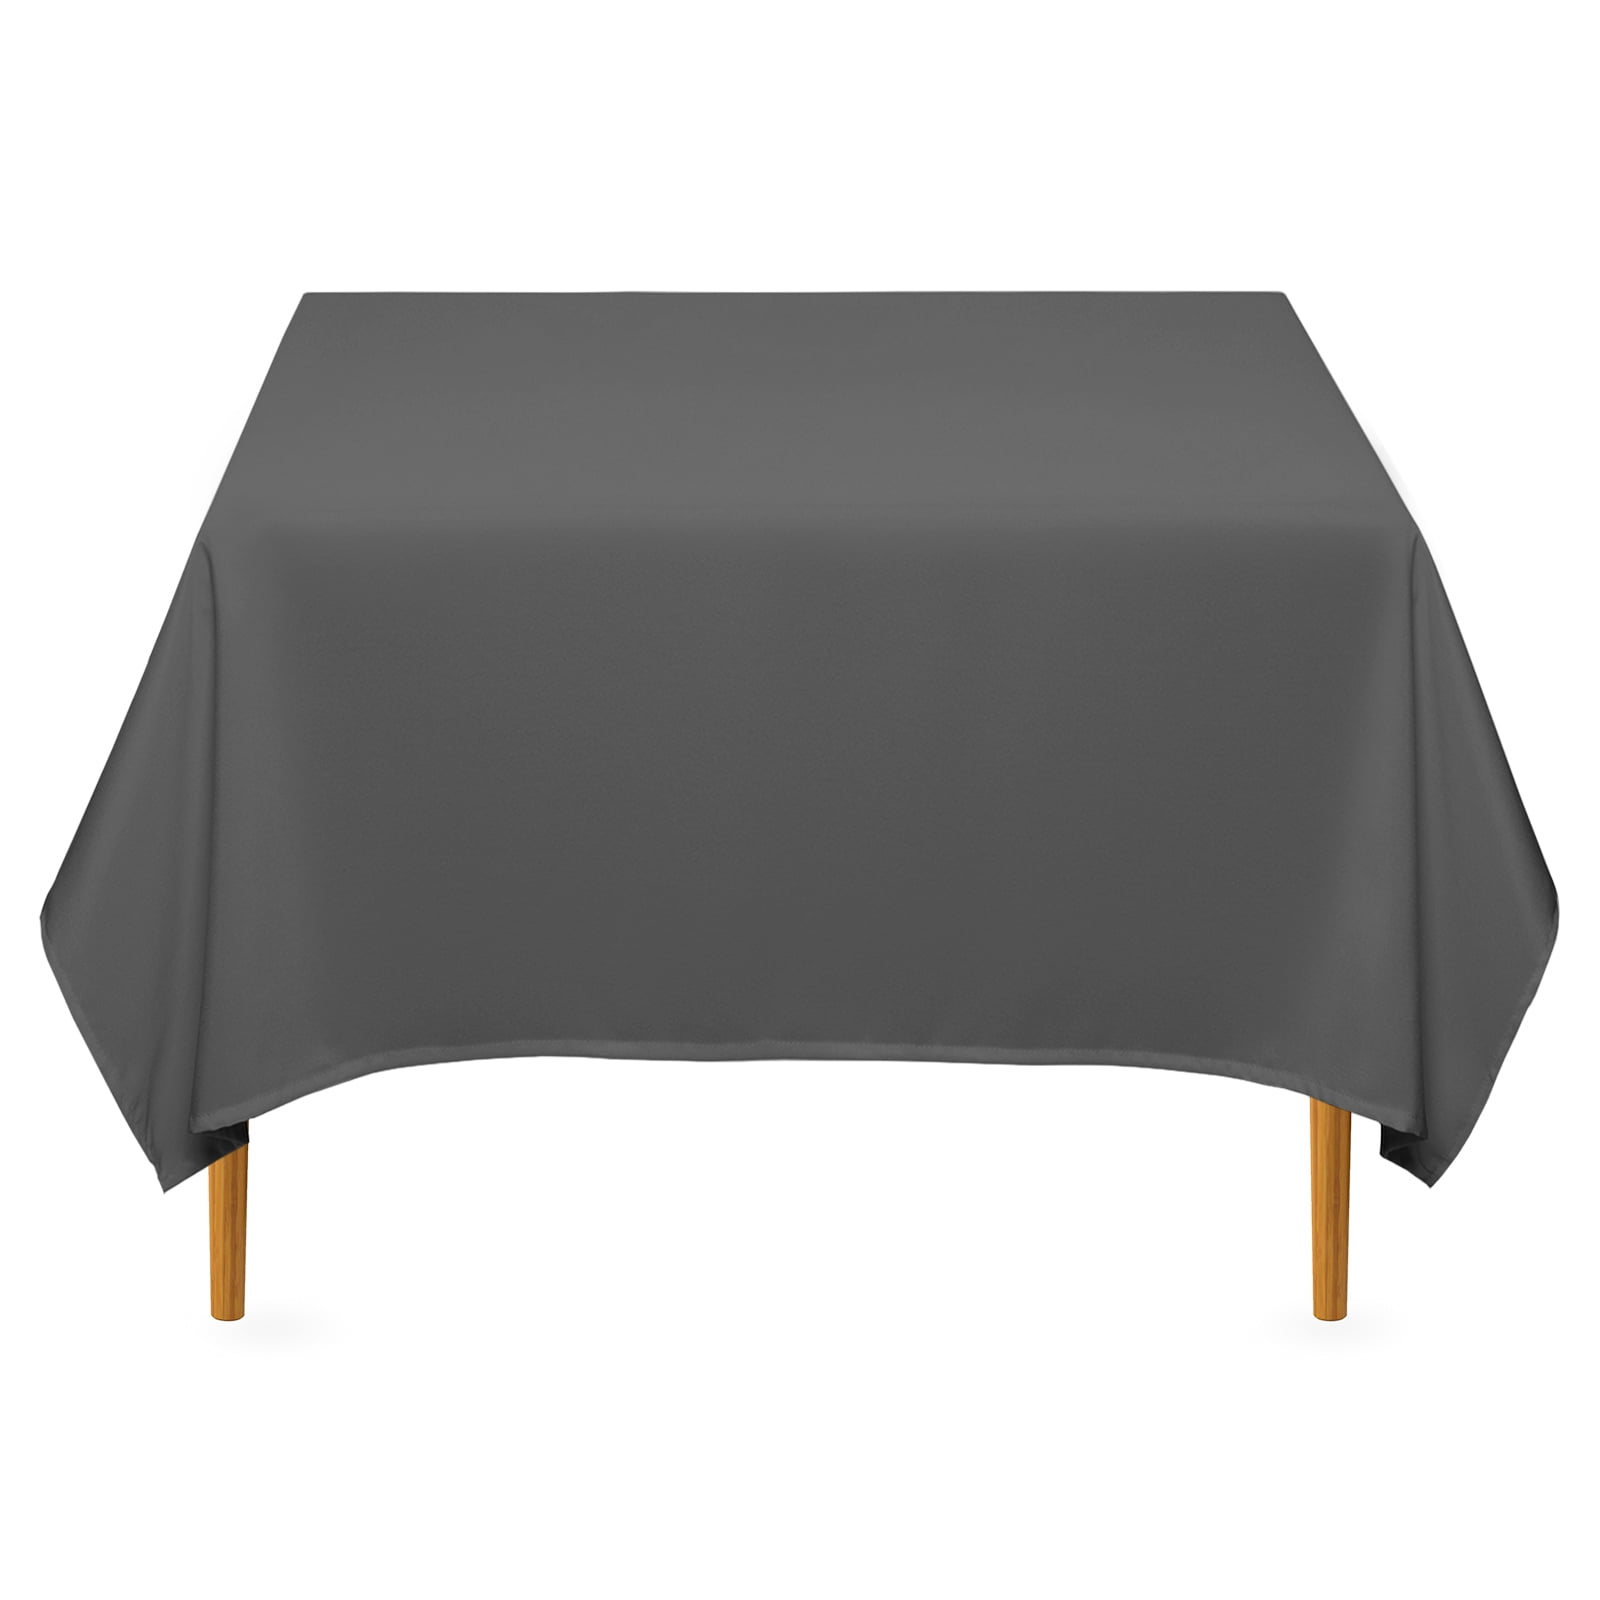 Spill Proof/Stain Resistant/Wrinkle Free-for Camping Picnic Dinner,Restaurant Black and White Tektrum 100% Polyester Waterproof 70 X 70 inch 70X70 Square Checker Checkered Tablecloth Table Cover 